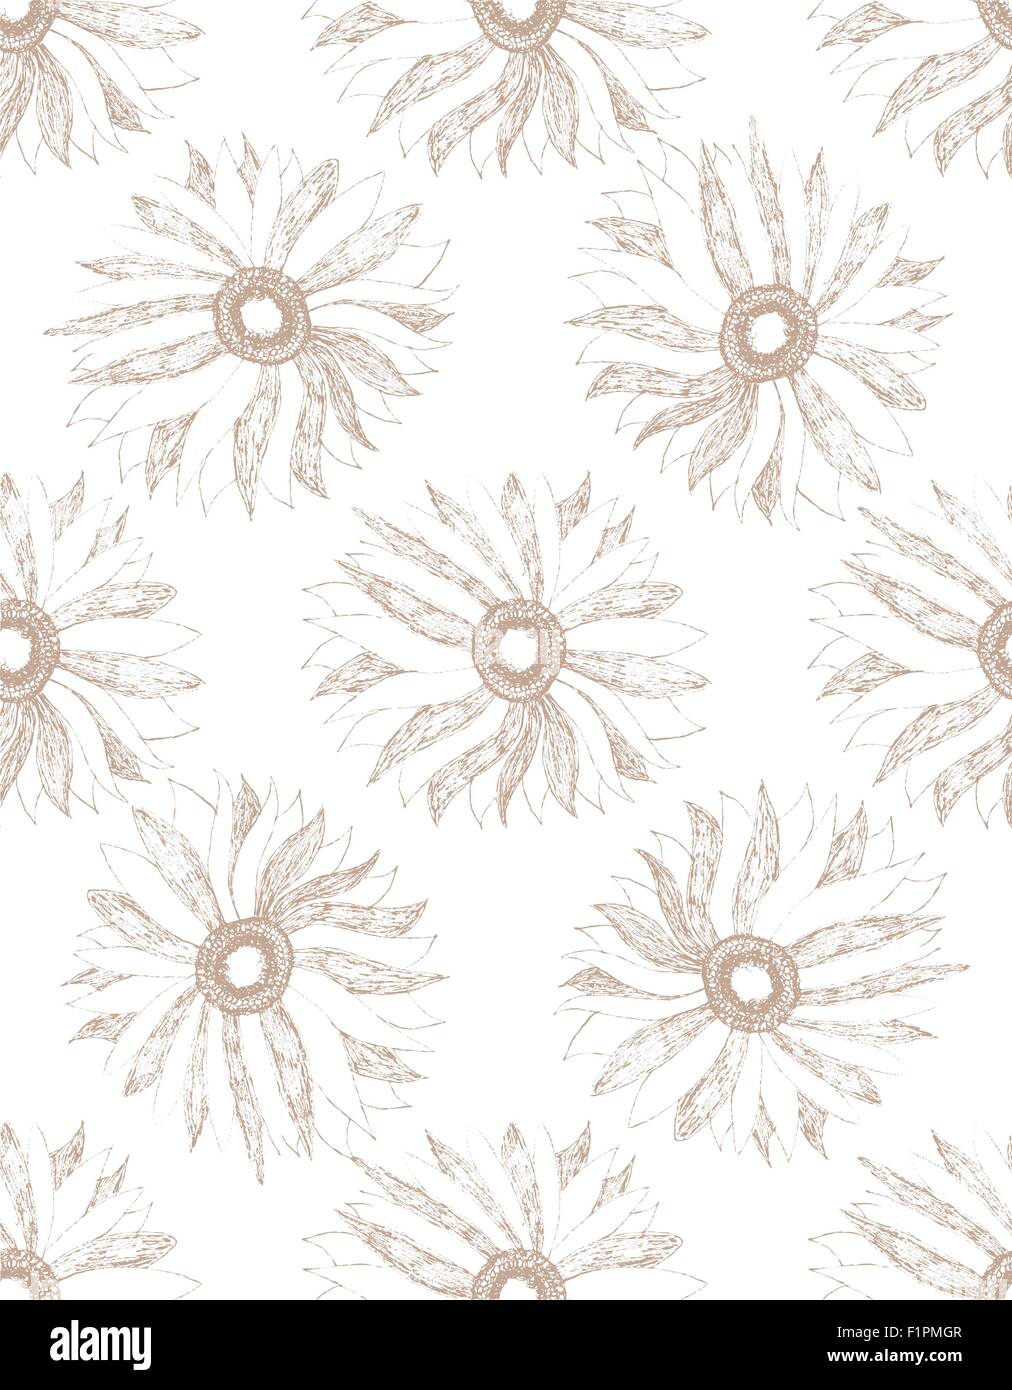 Vintage floral seamless pattern with hand drawn flowers Vector illustration Stock Vector